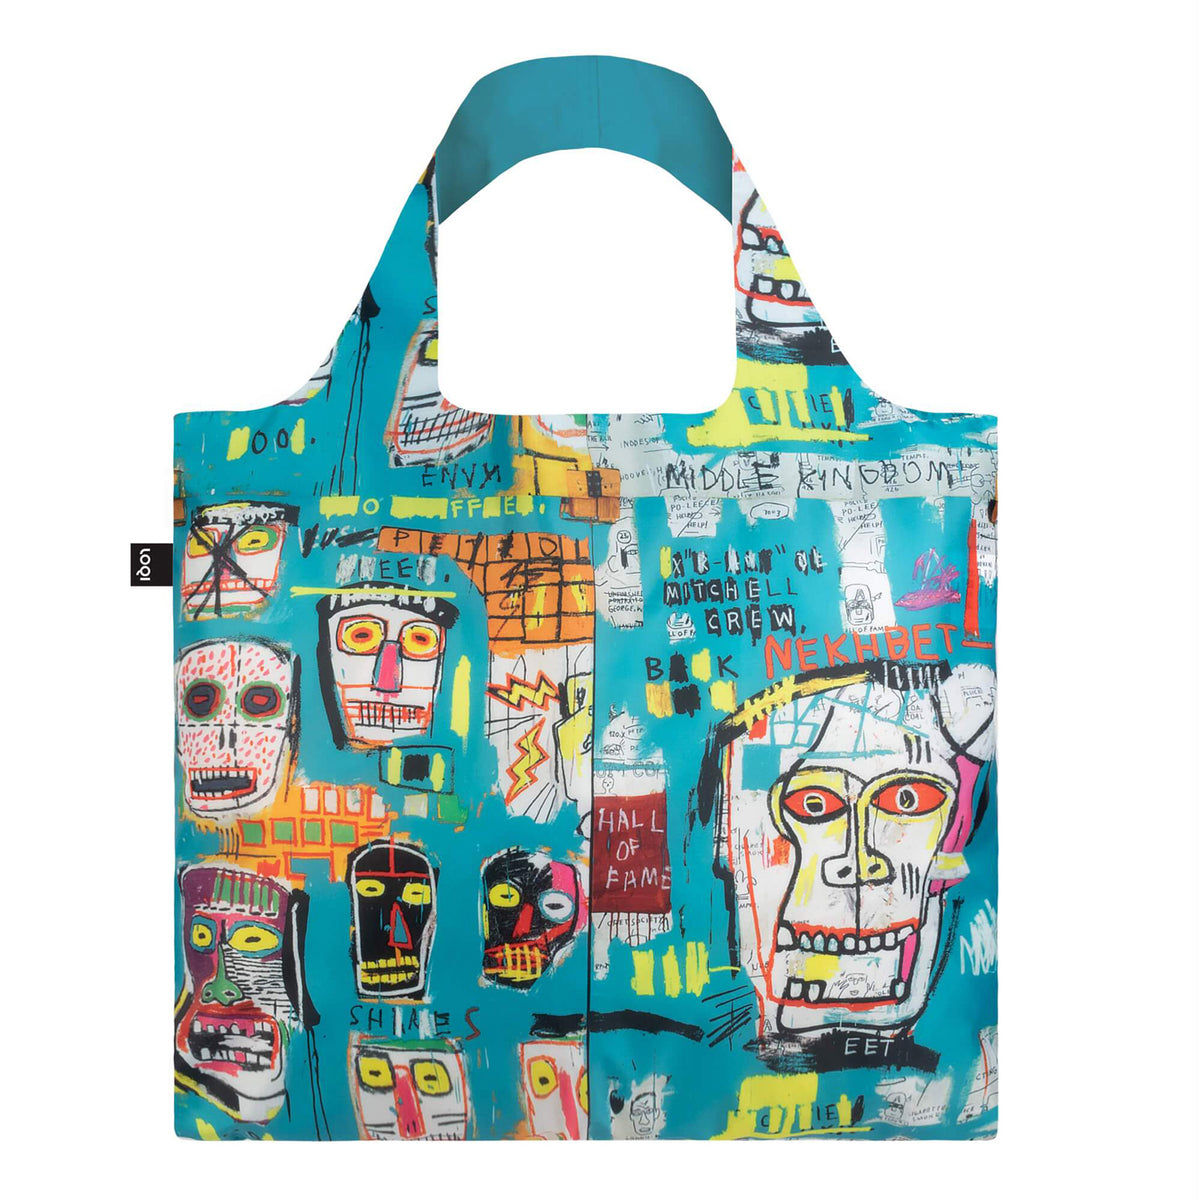 The Basquiat Skull Tote front view.